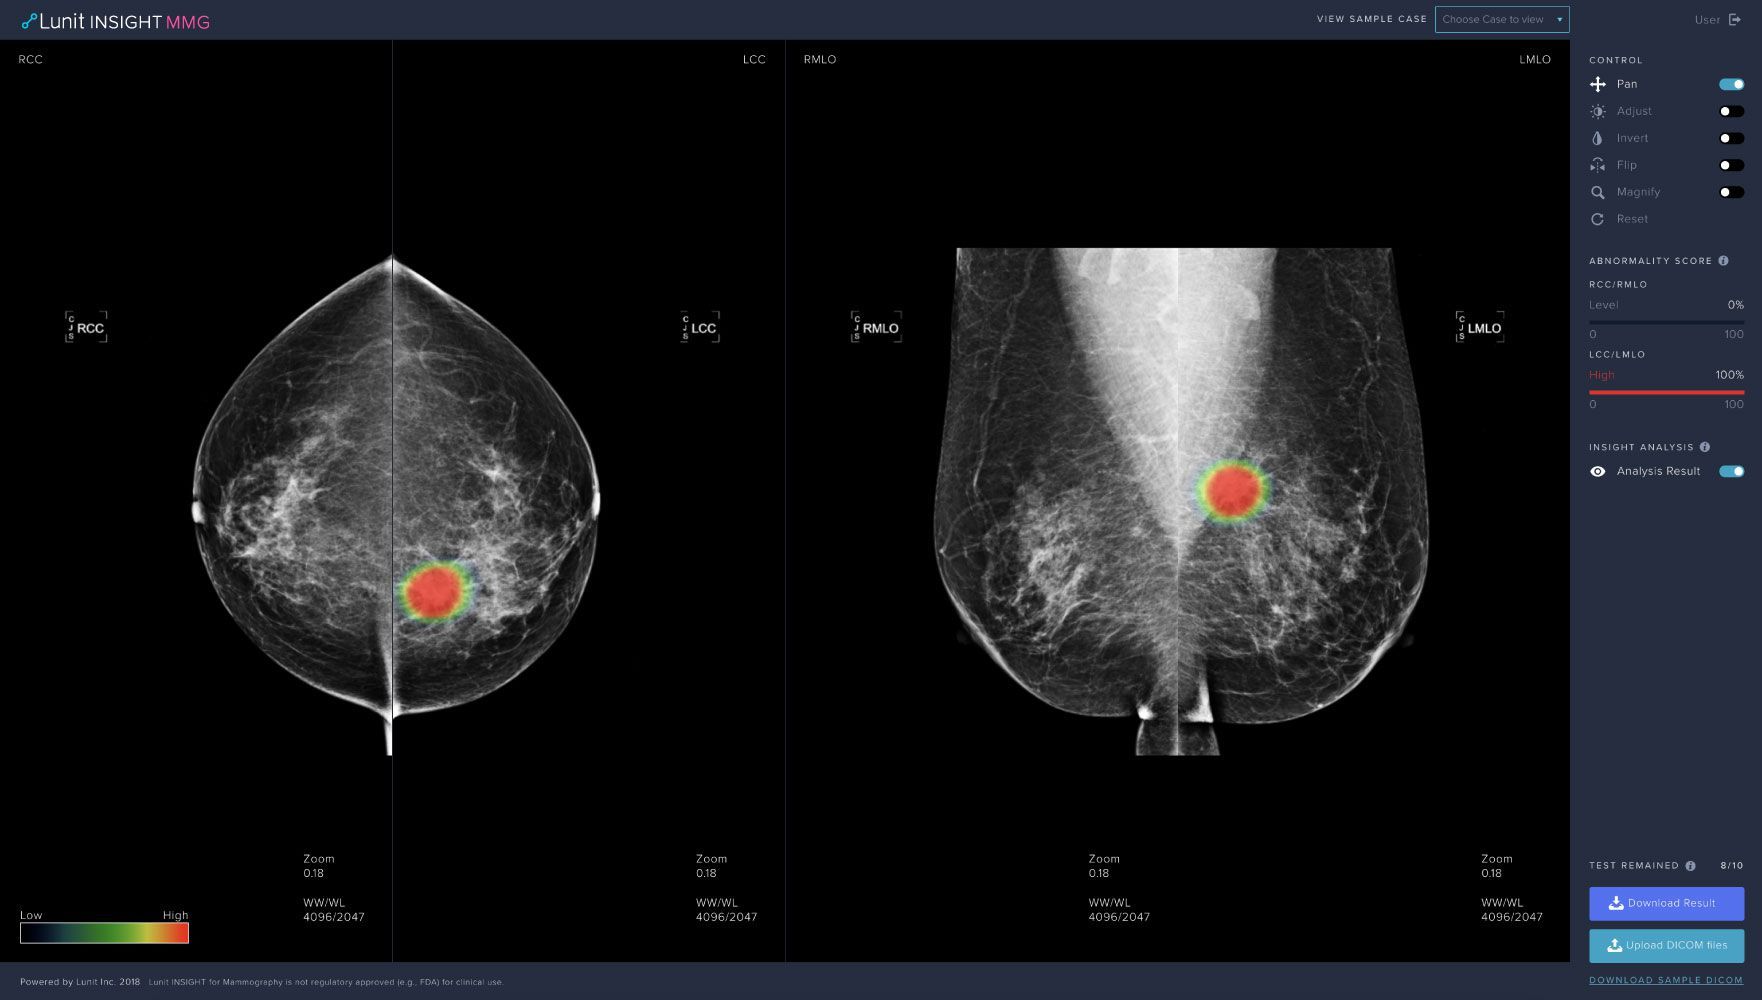 ▲ Lunit INSIGHT MMG, AI solution for breast cancer detection from mammograms